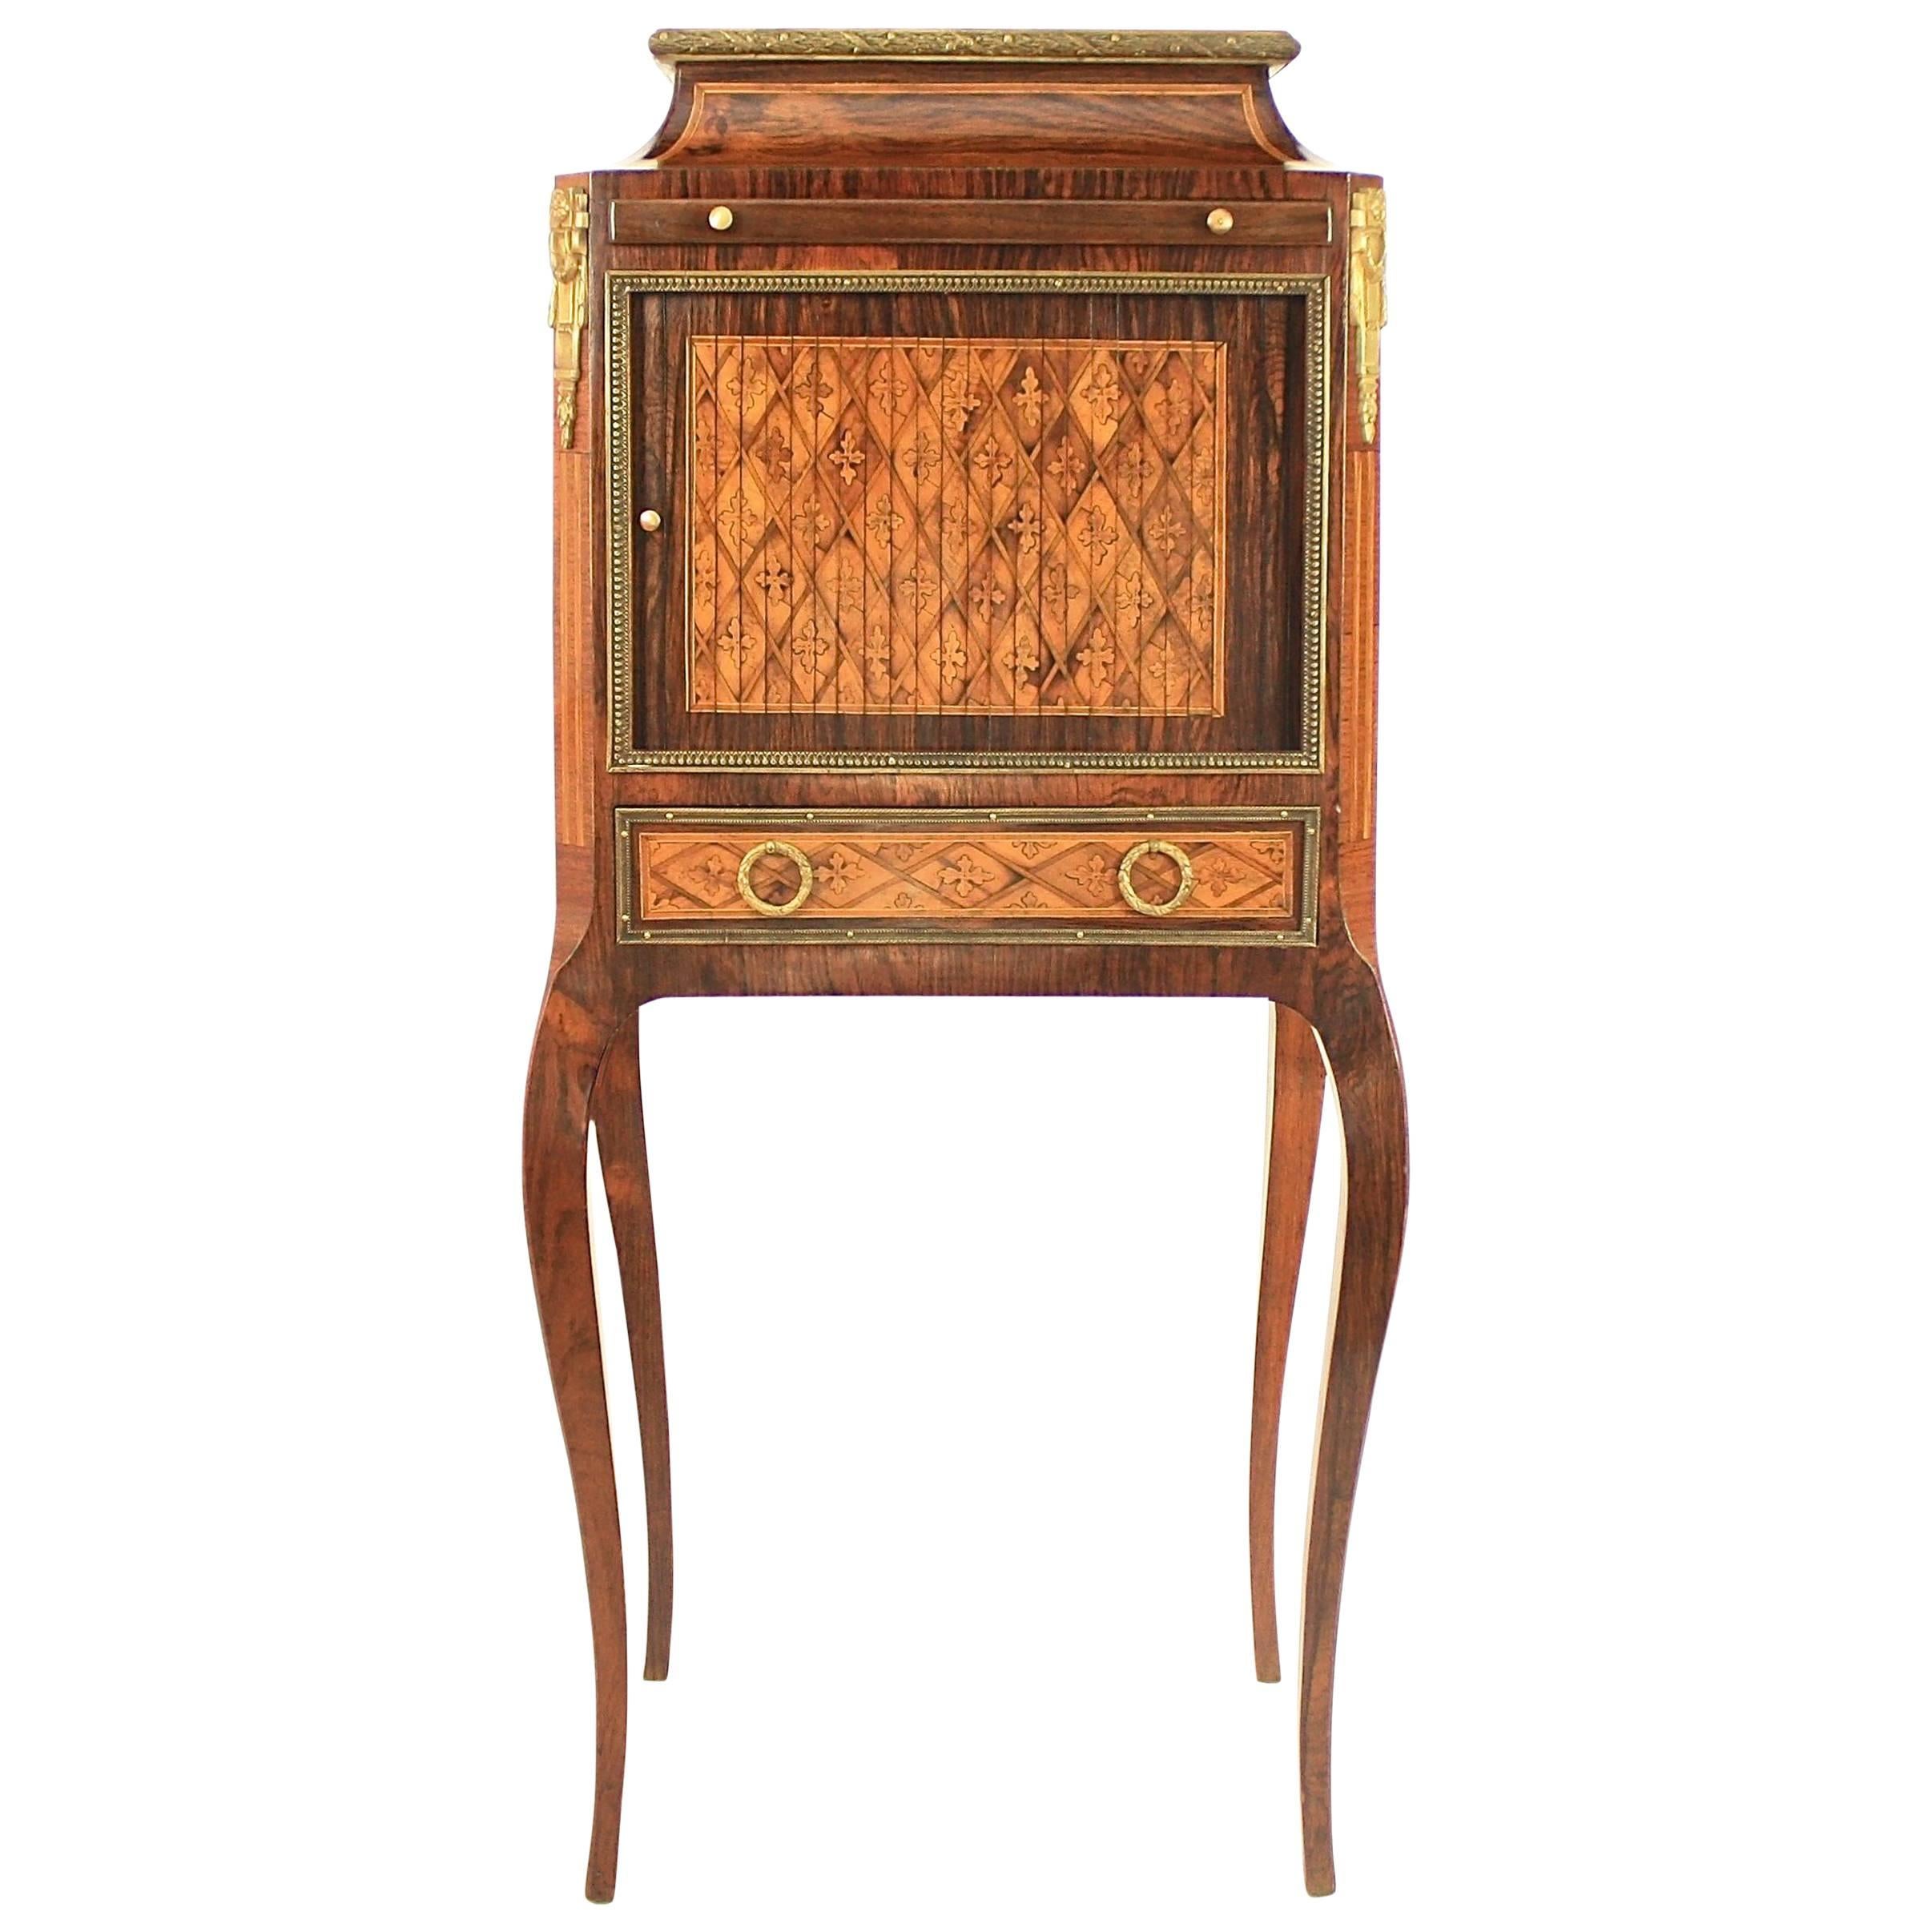 Small 19th Century Cabinet on Stand, in the Manner of L. BOUDIN